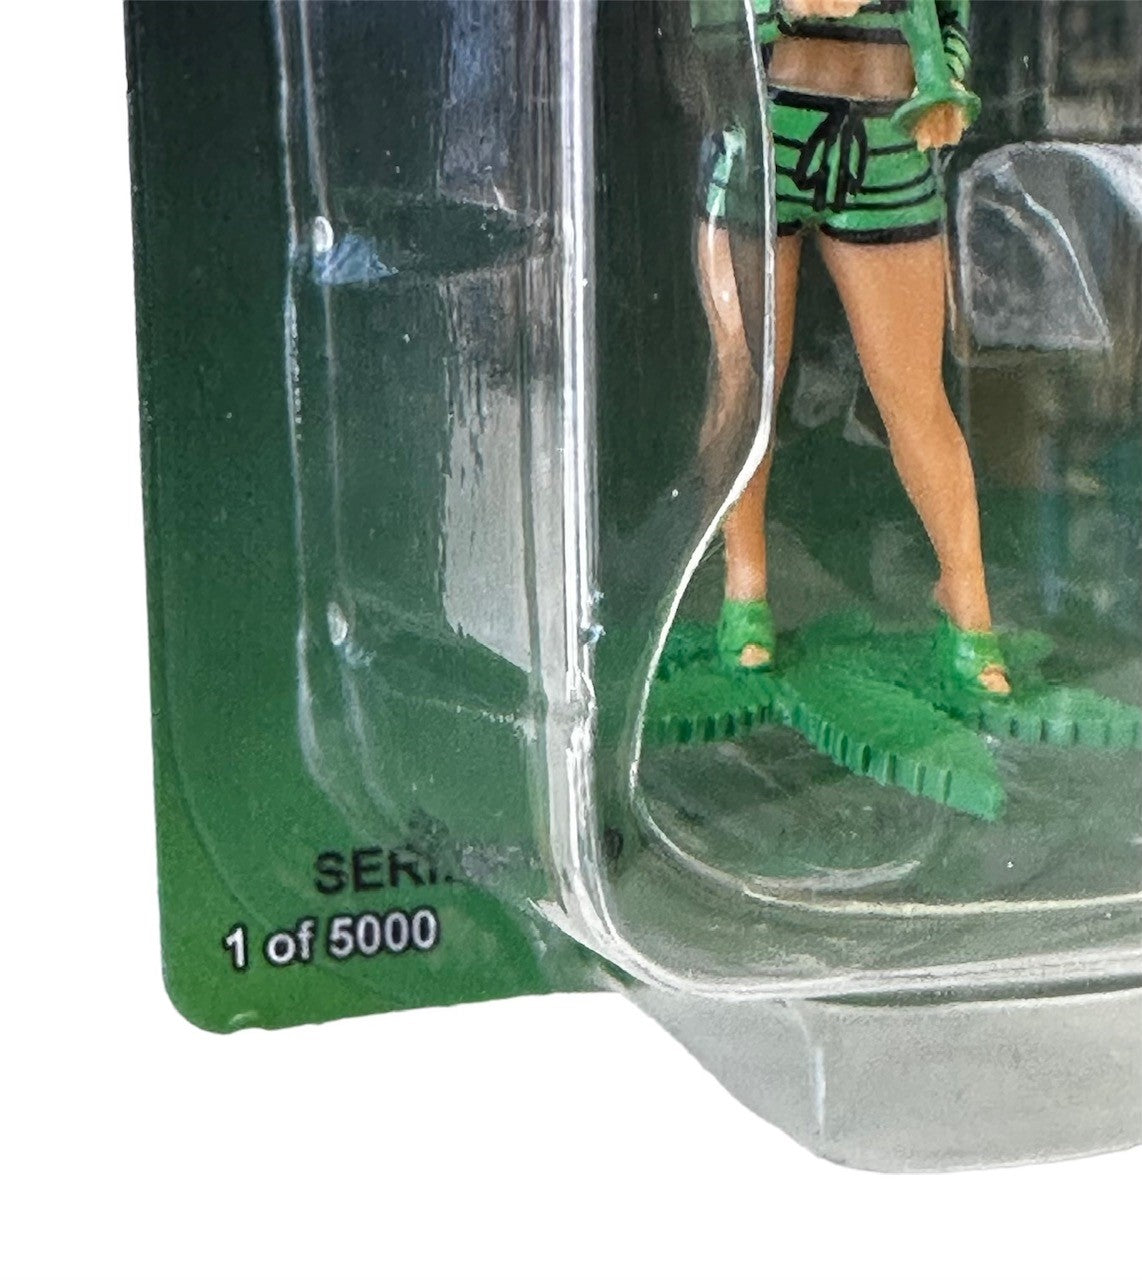 Limited Edition HOMIES SERIES 14 GREEN QUEEN - Variant Color